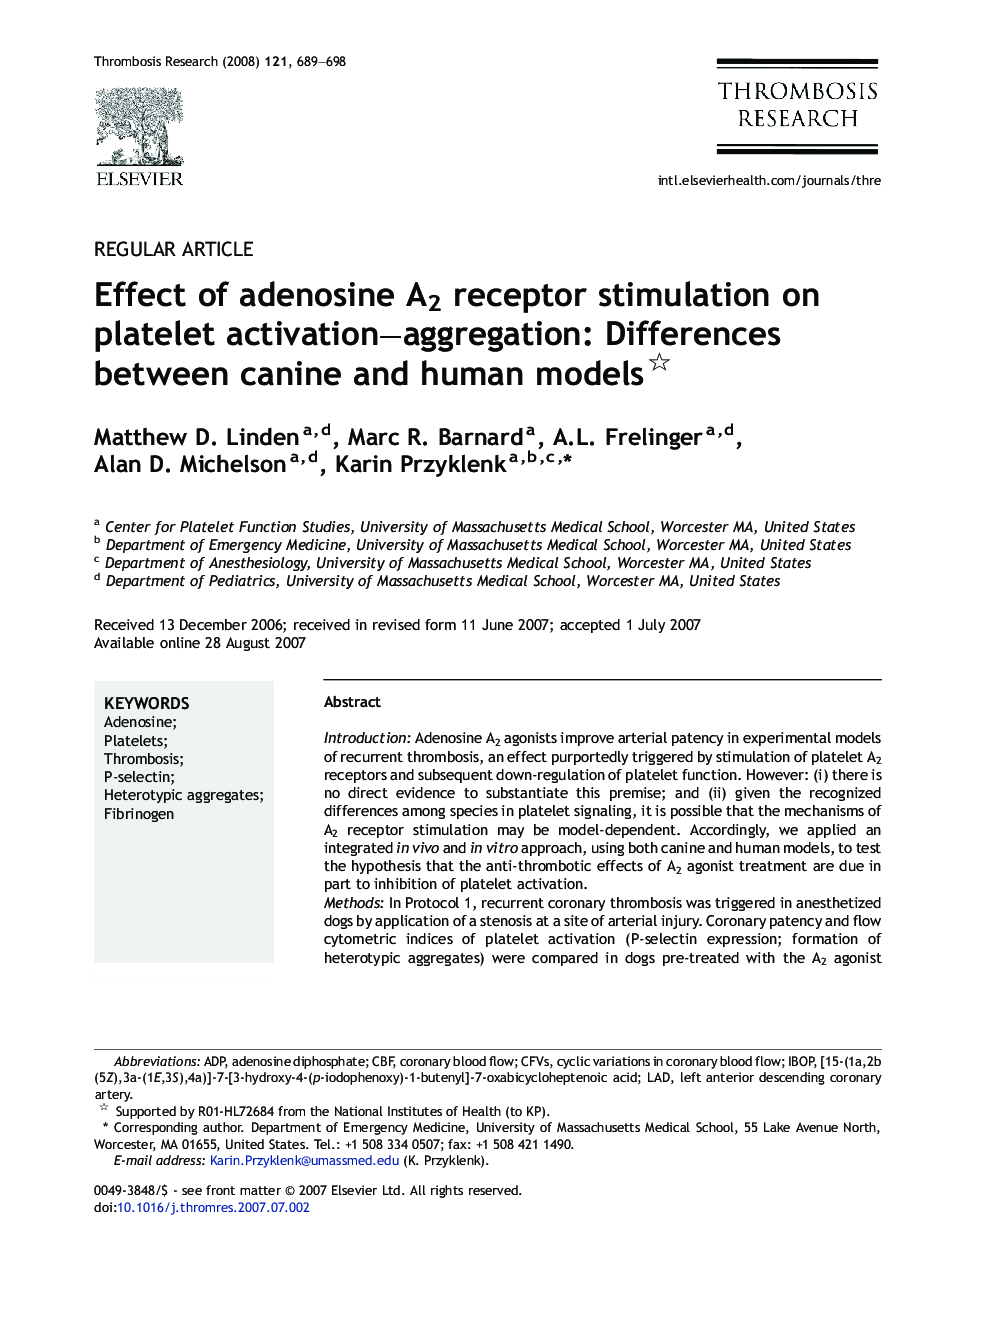 Effect of adenosine A2 receptor stimulation on platelet activation–aggregation: Differences between canine and human models 